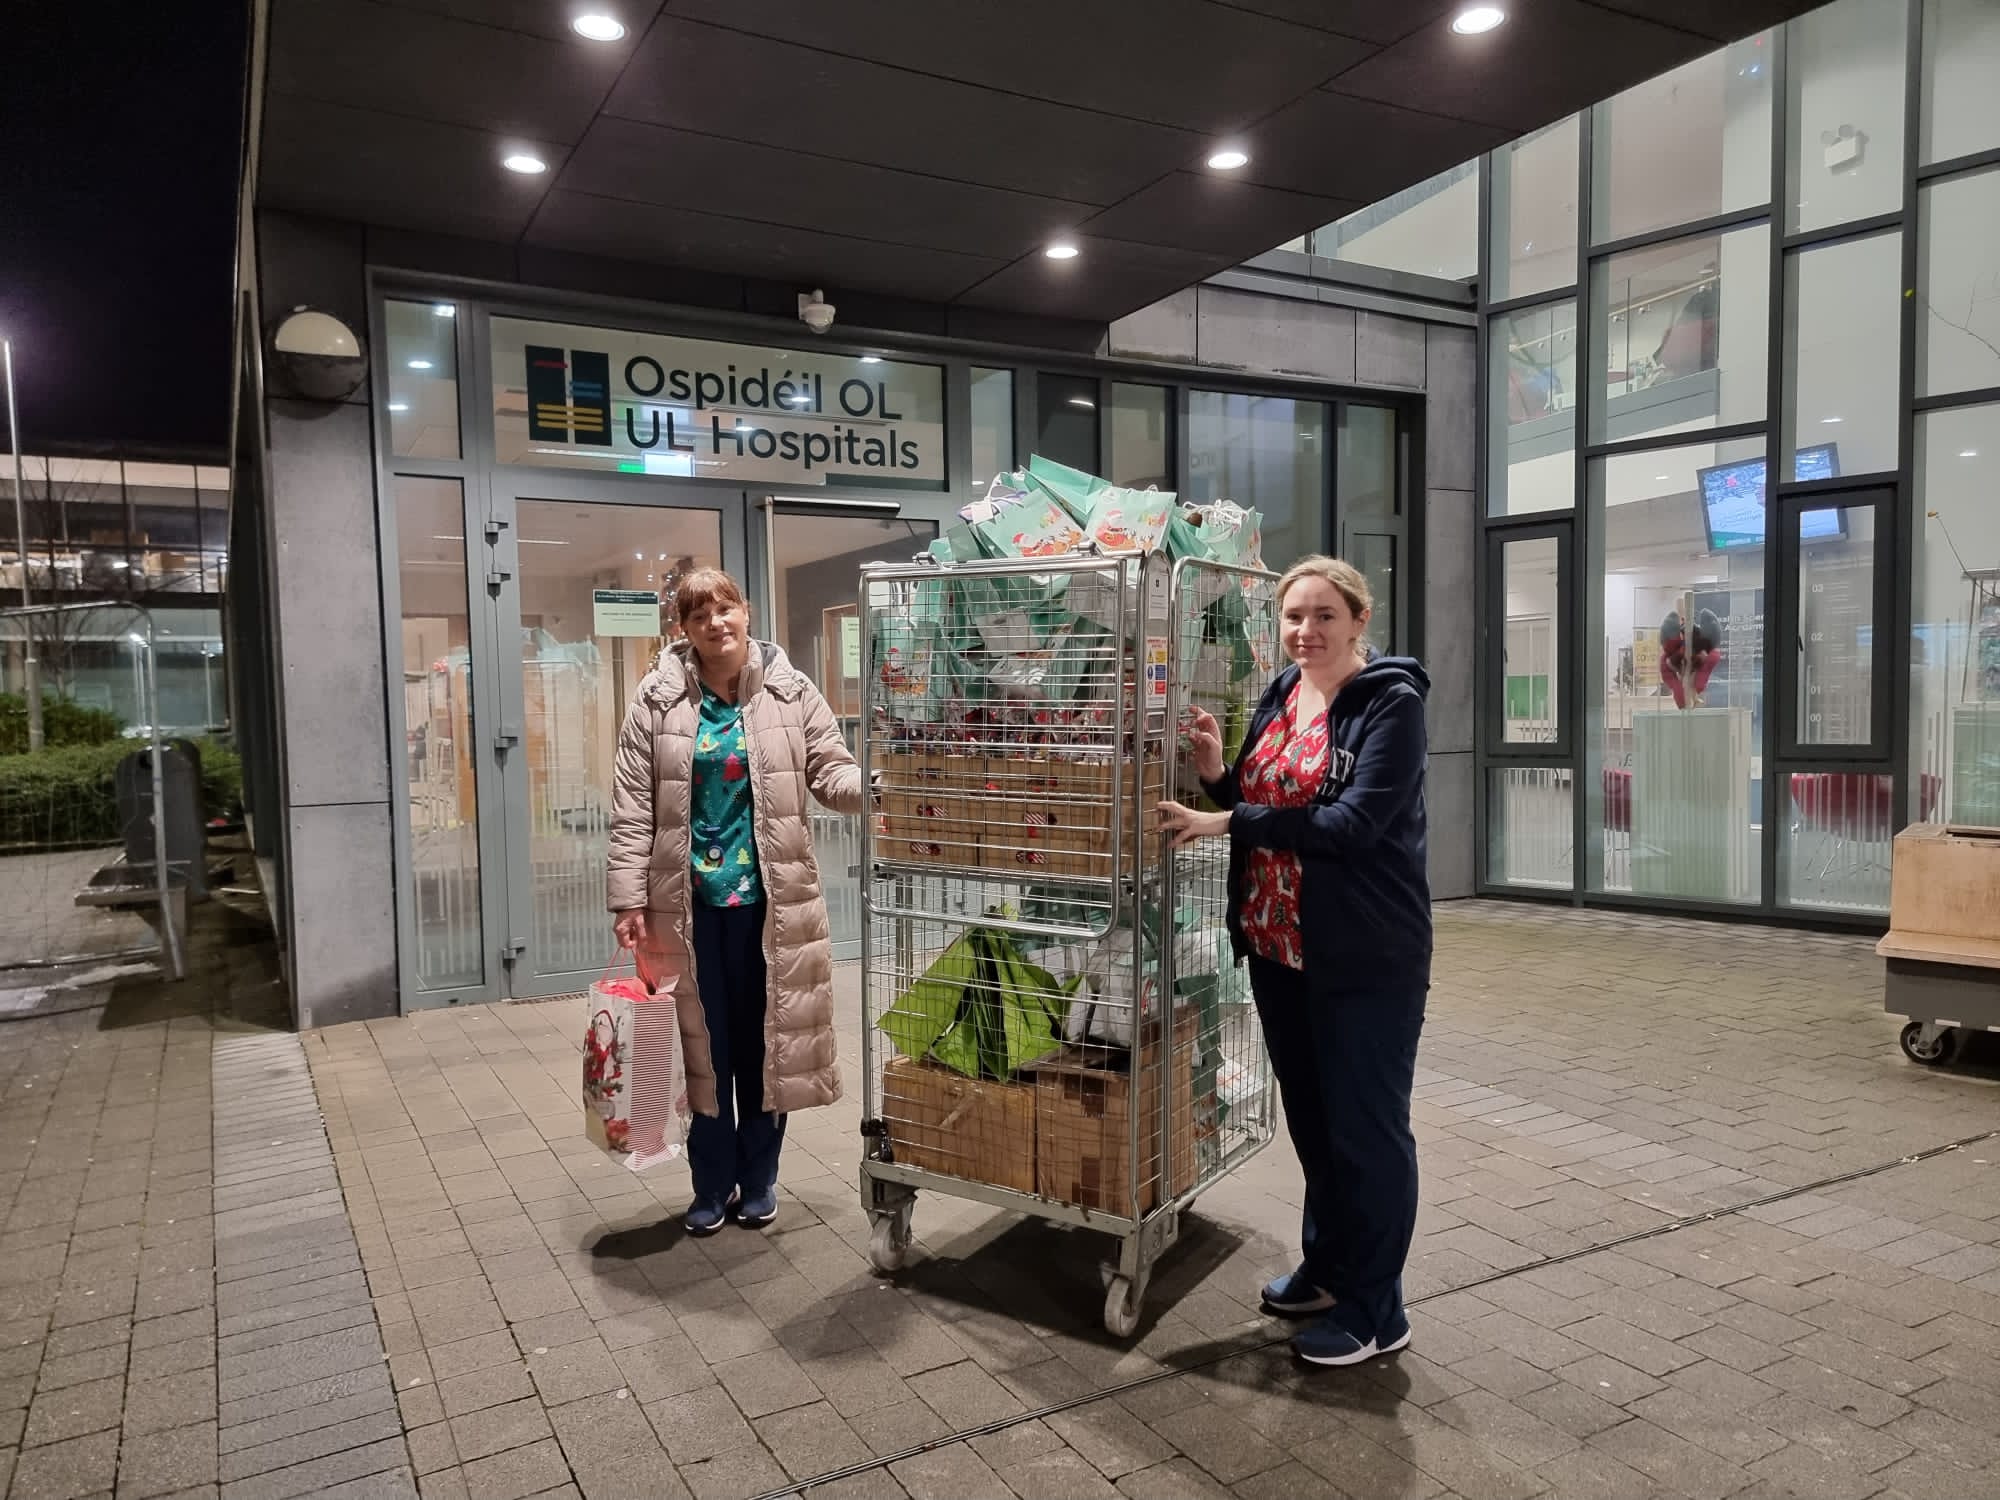 Let’s Fund It made a large Christmas donation of goodie bags and children’s books to the young patients at the University Hospital Limerick’s Children’s Ark